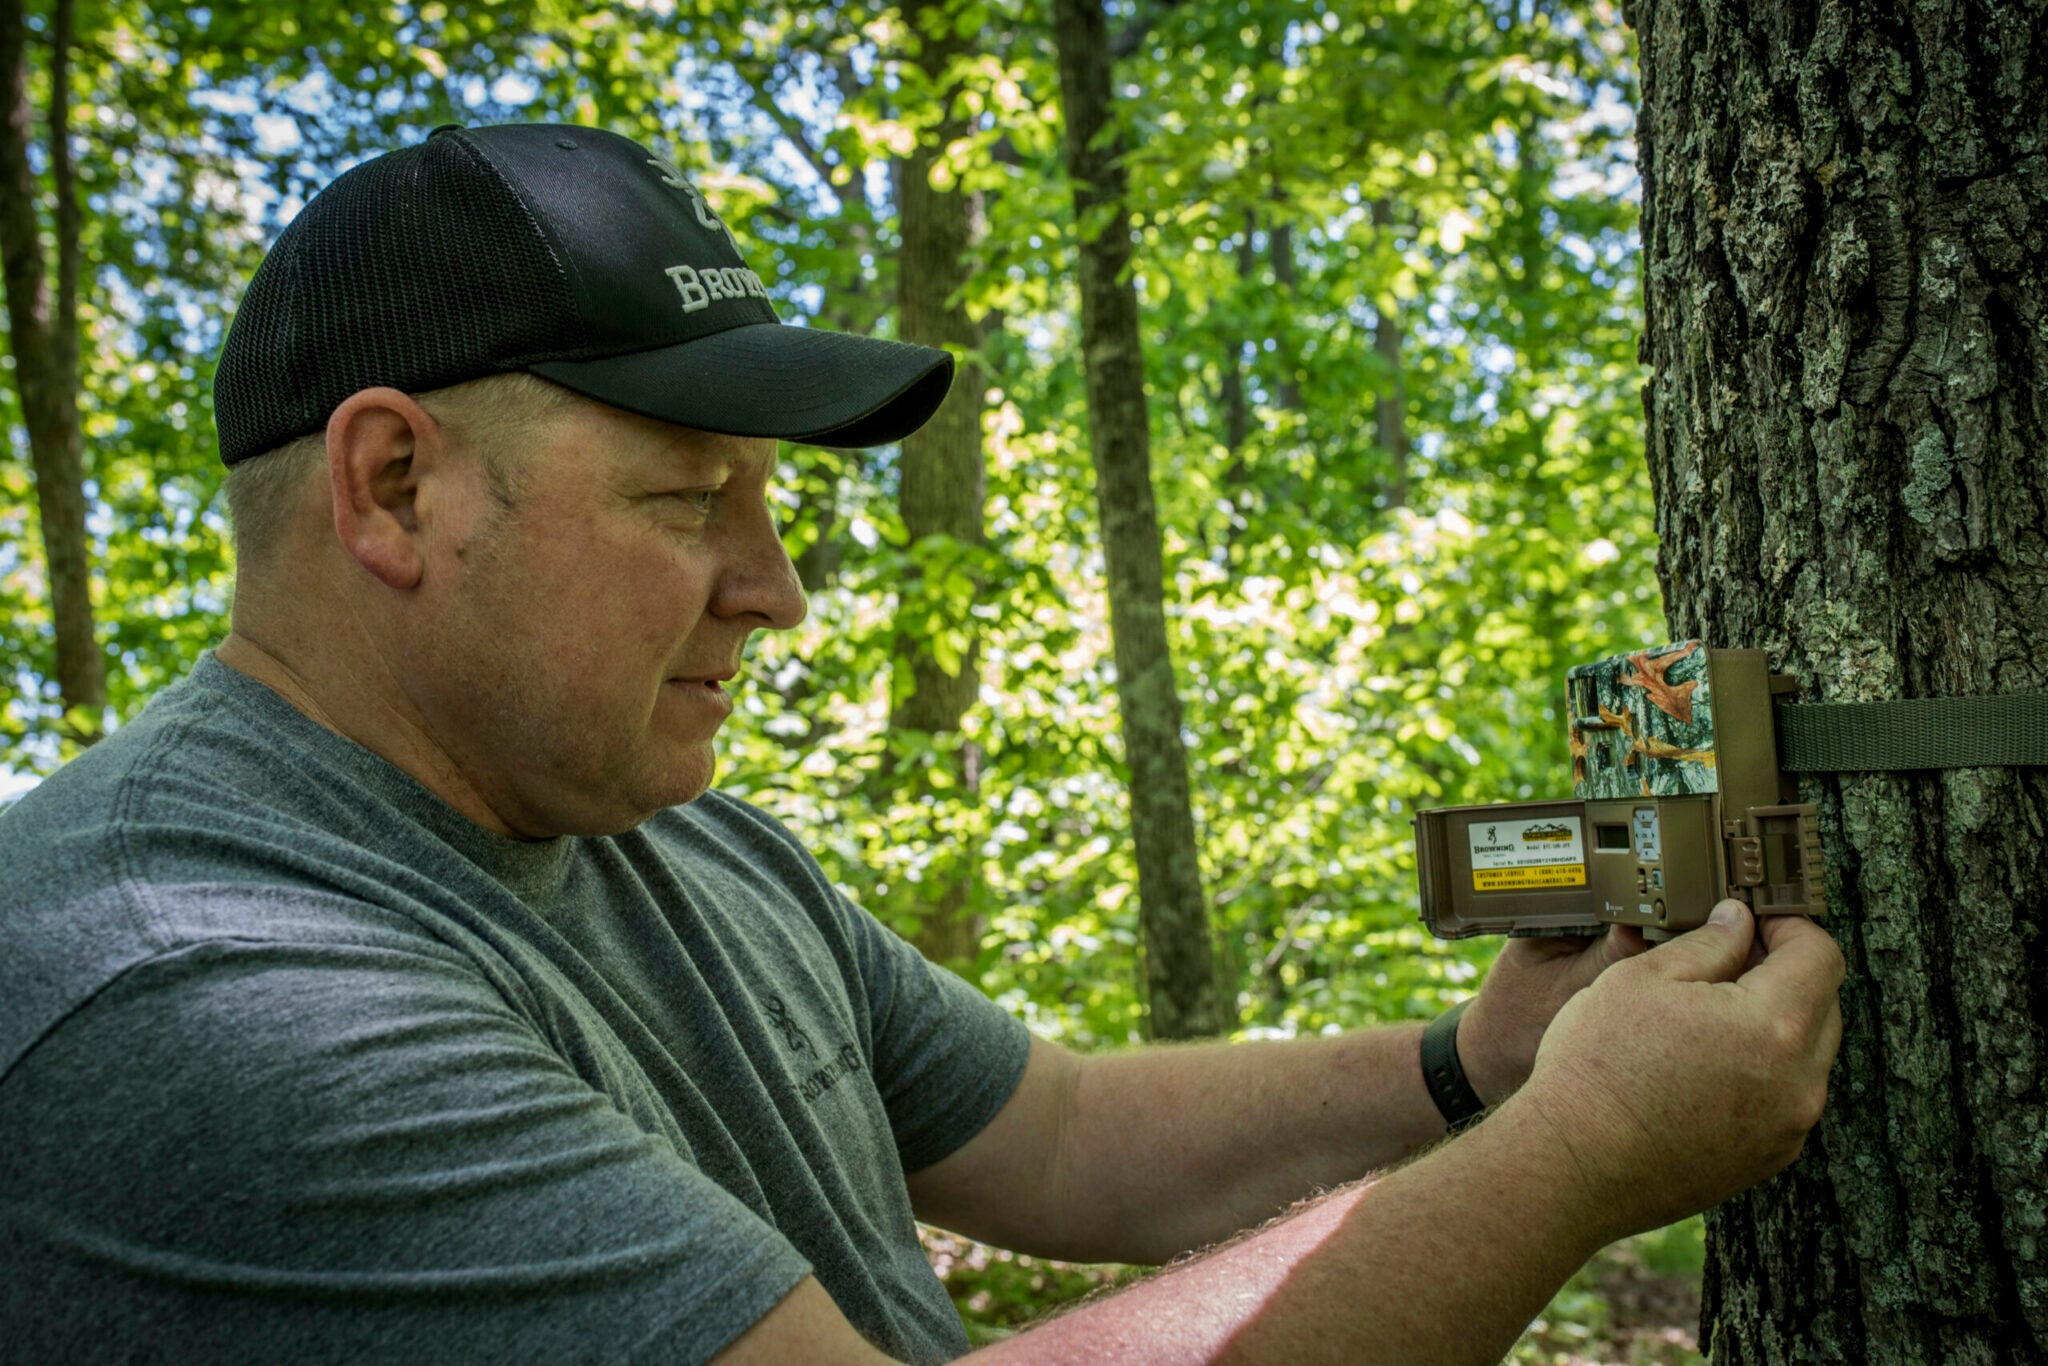 Setting up a trail cam